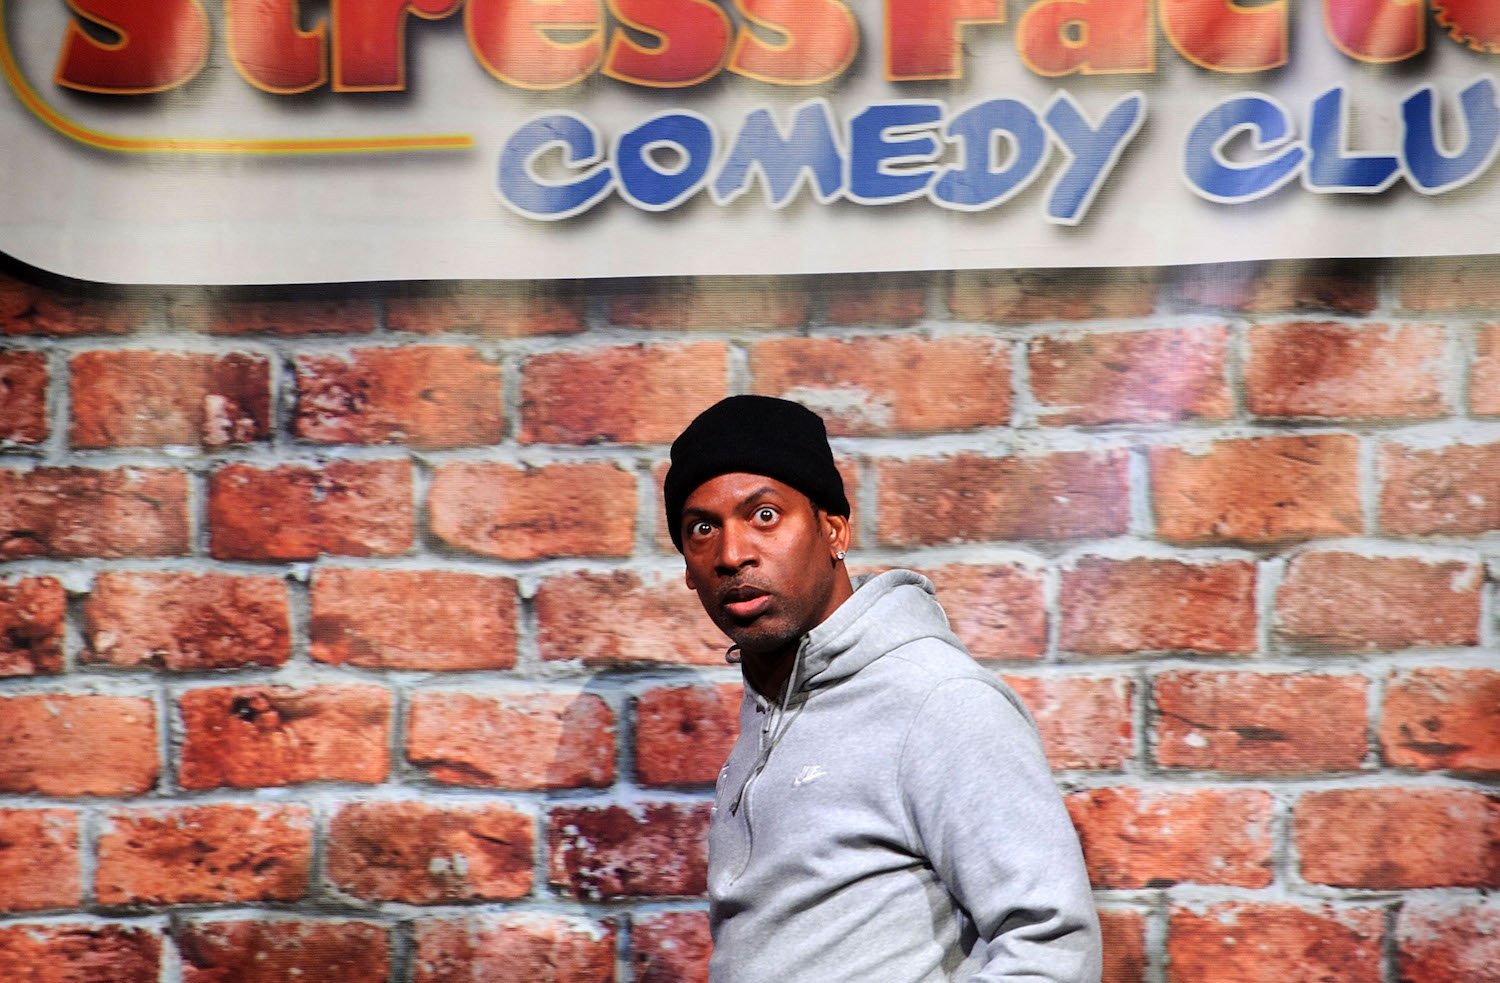 Chris Rock's brother, Tony Rock, performing at a comedy show